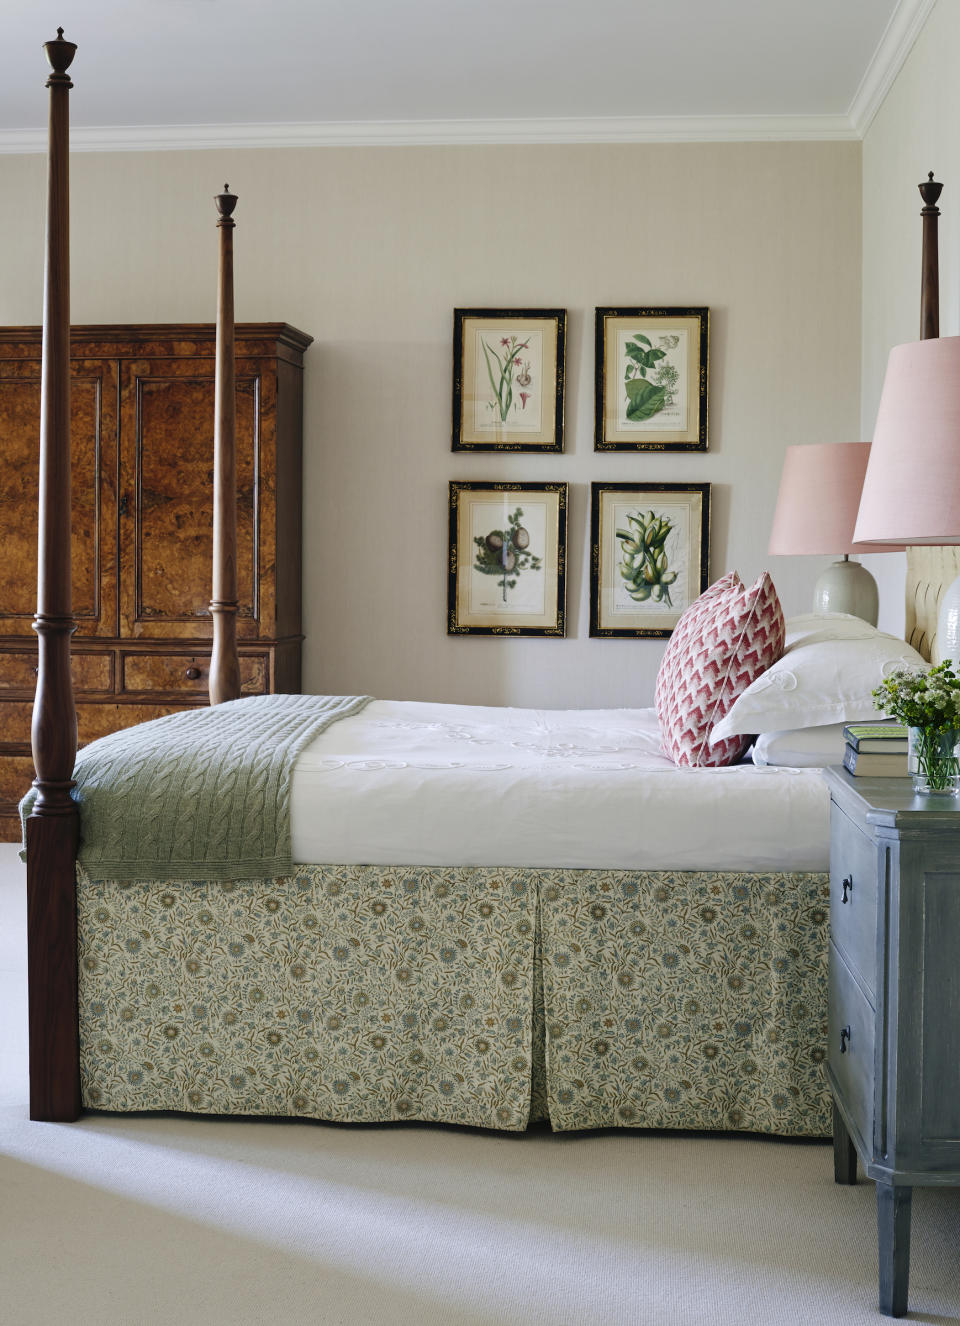 TRIM THE BED WITH A VALANCE